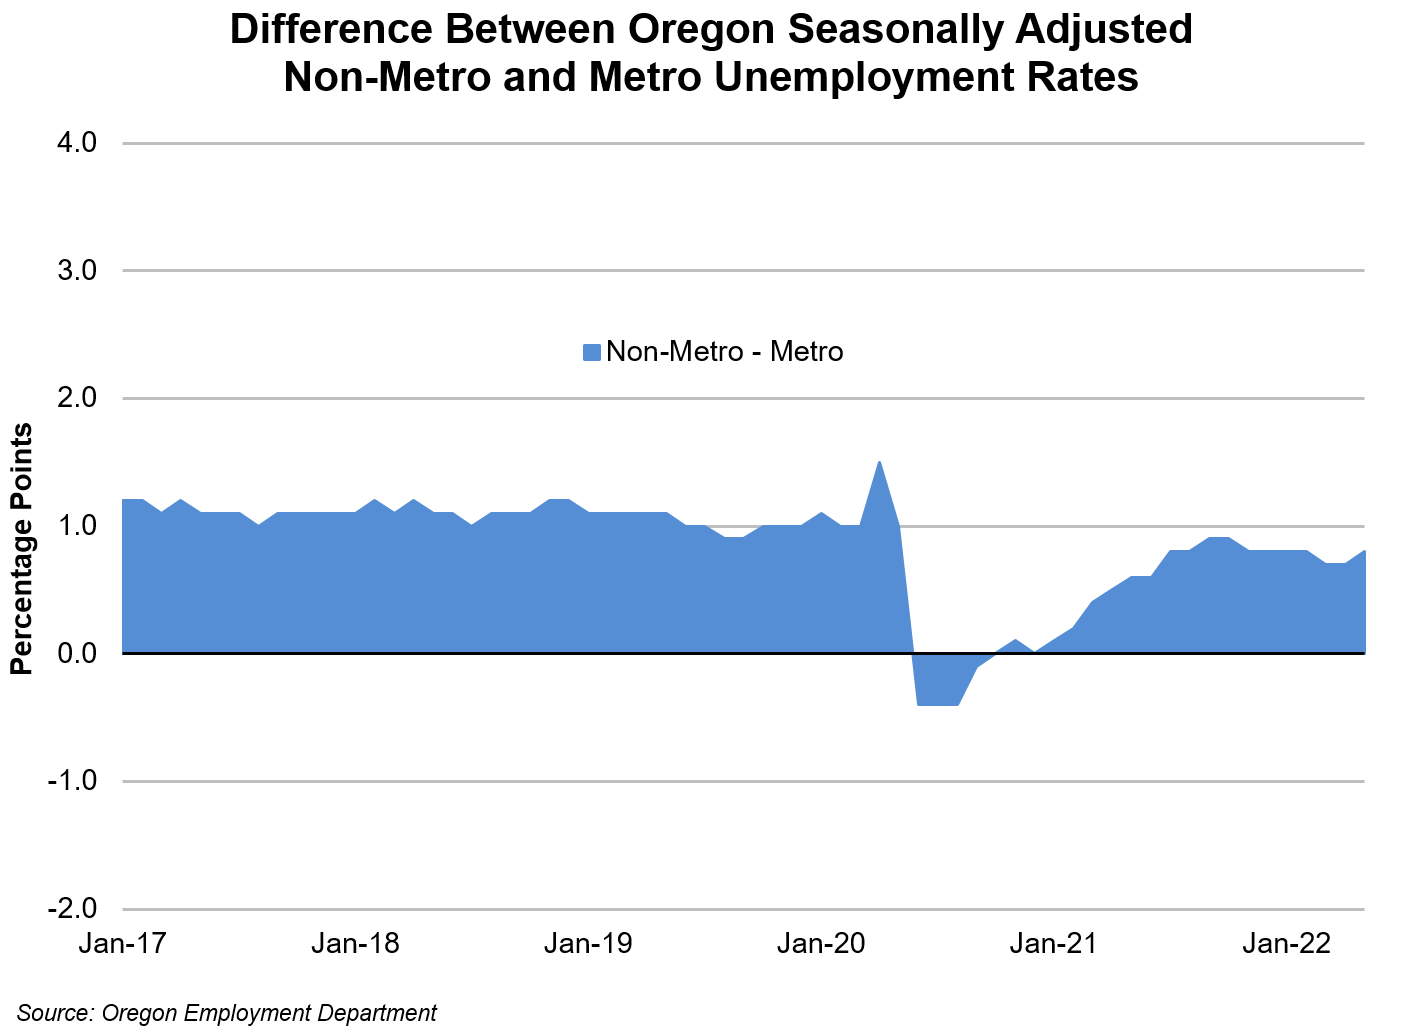 Graph showing difference between Oregon seasonally adjusted non-metro and metro unemployment rates